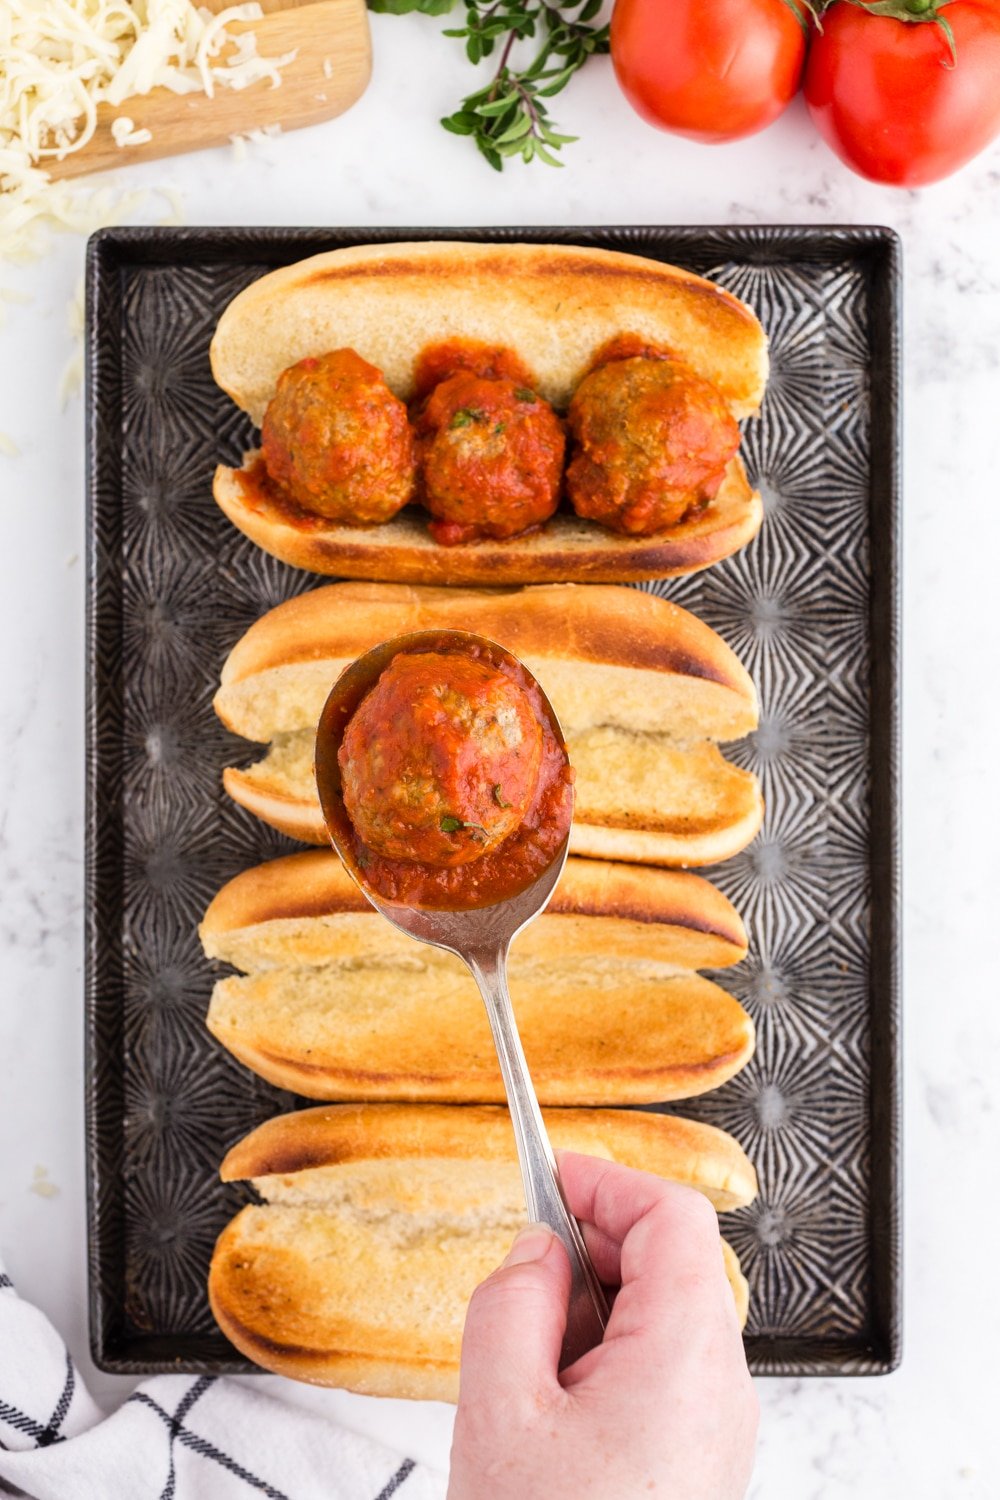 Spoon with meatball held over cookie sheet with sandwich bun, one sandwich bun filled with three meatballs, tomatoes, basil, shredded cheese, on a marble countertop.